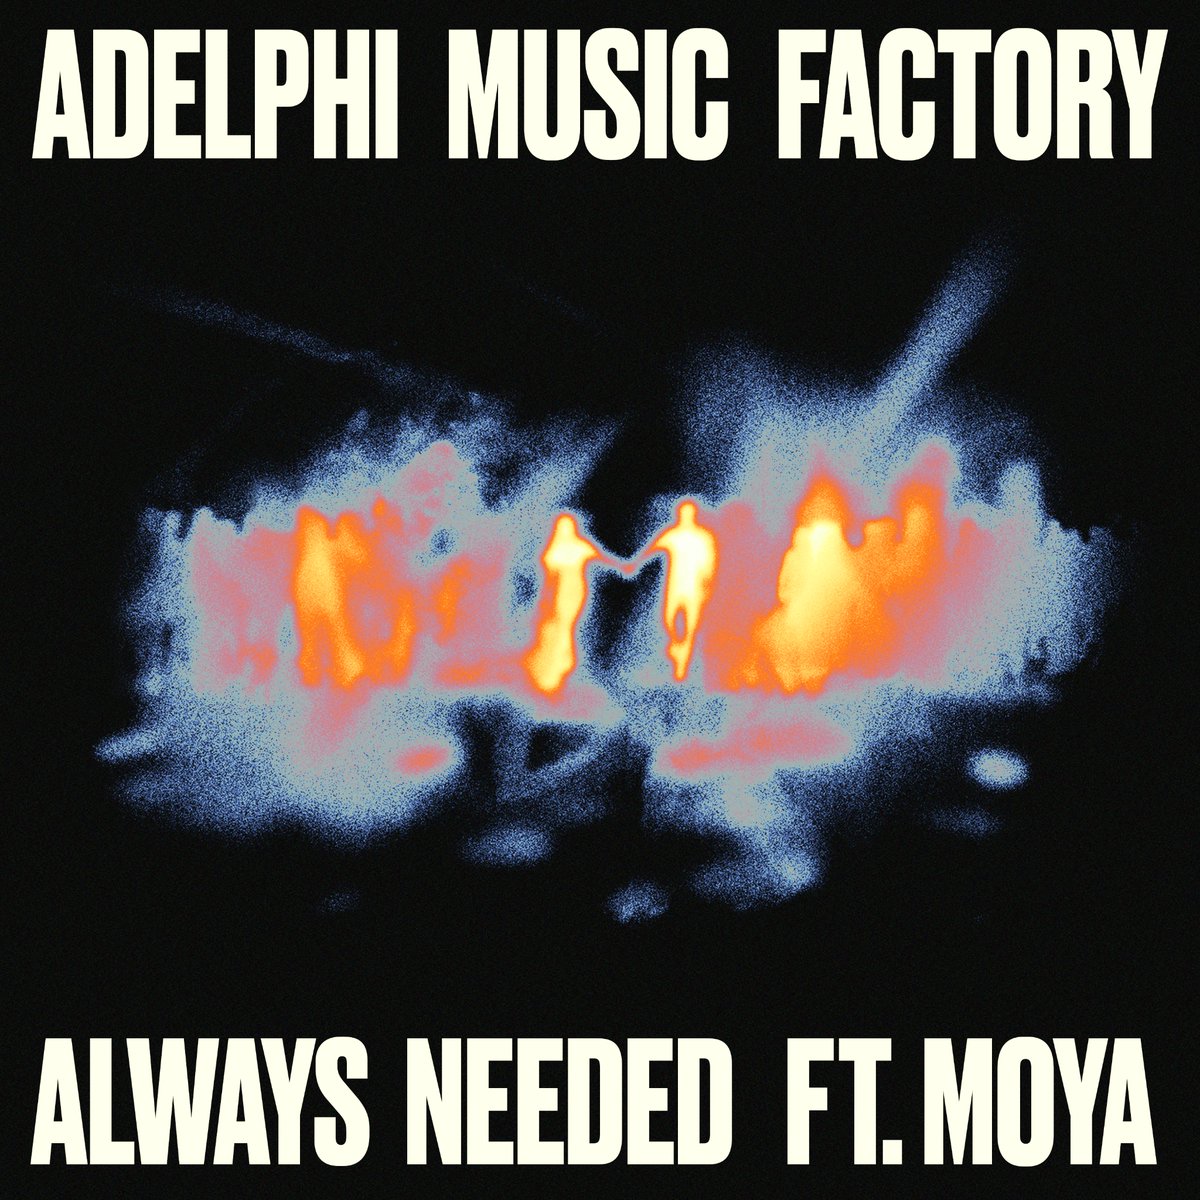 🚨🚨🚨 AMF - ALWAYS NEEDED FT MOYA. 26.04.24 PRE-SAVE IN USUAL SPOT. 🚨🚨🚨